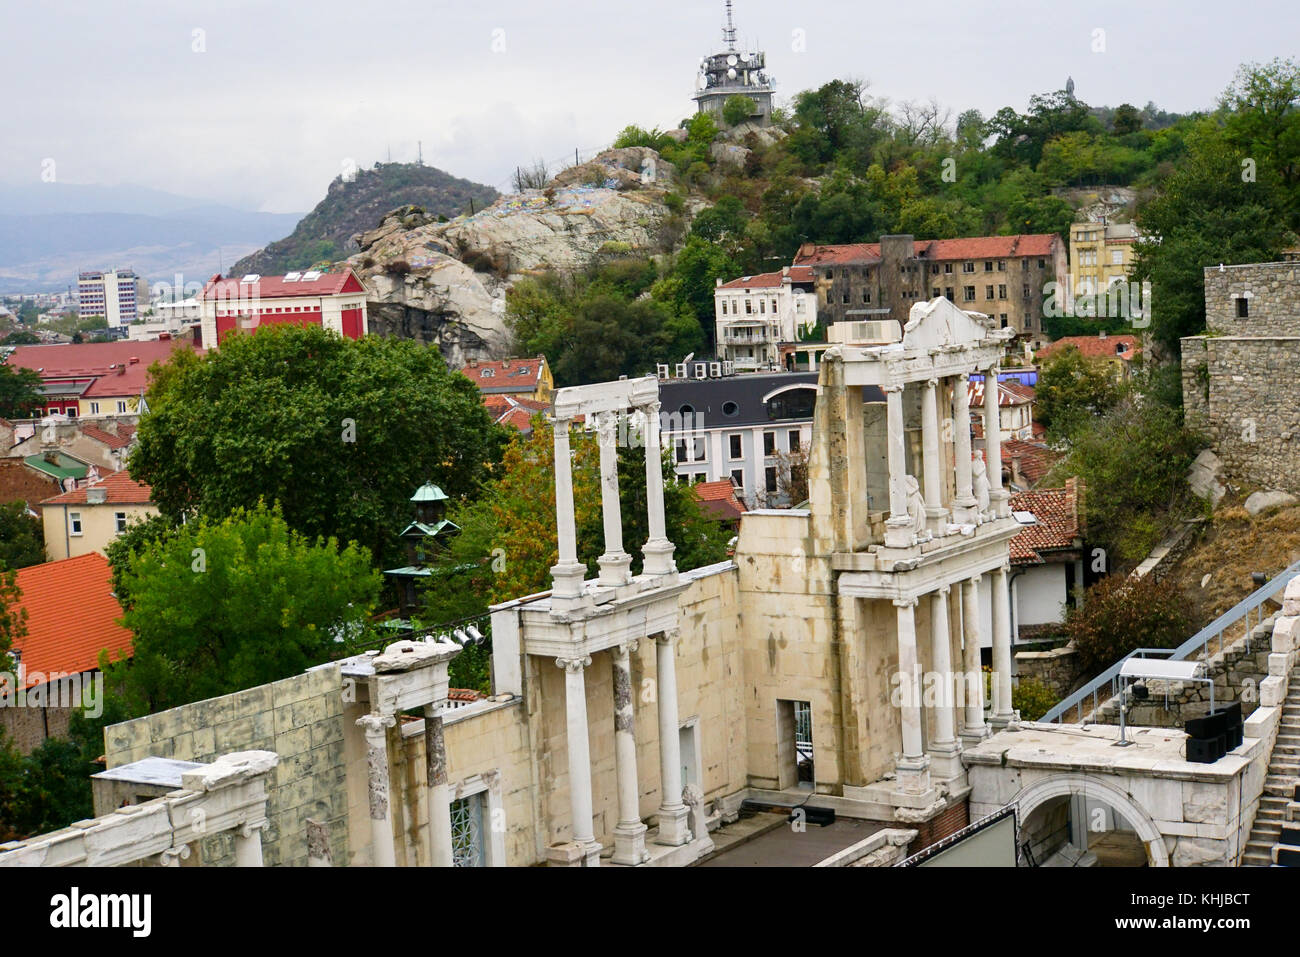 The Roman theatre of Plovdiv is one of the world's best-preserved ancient theatres, located in the city center of Plovdiv, Bulgaria. It was constructe Stock Photo